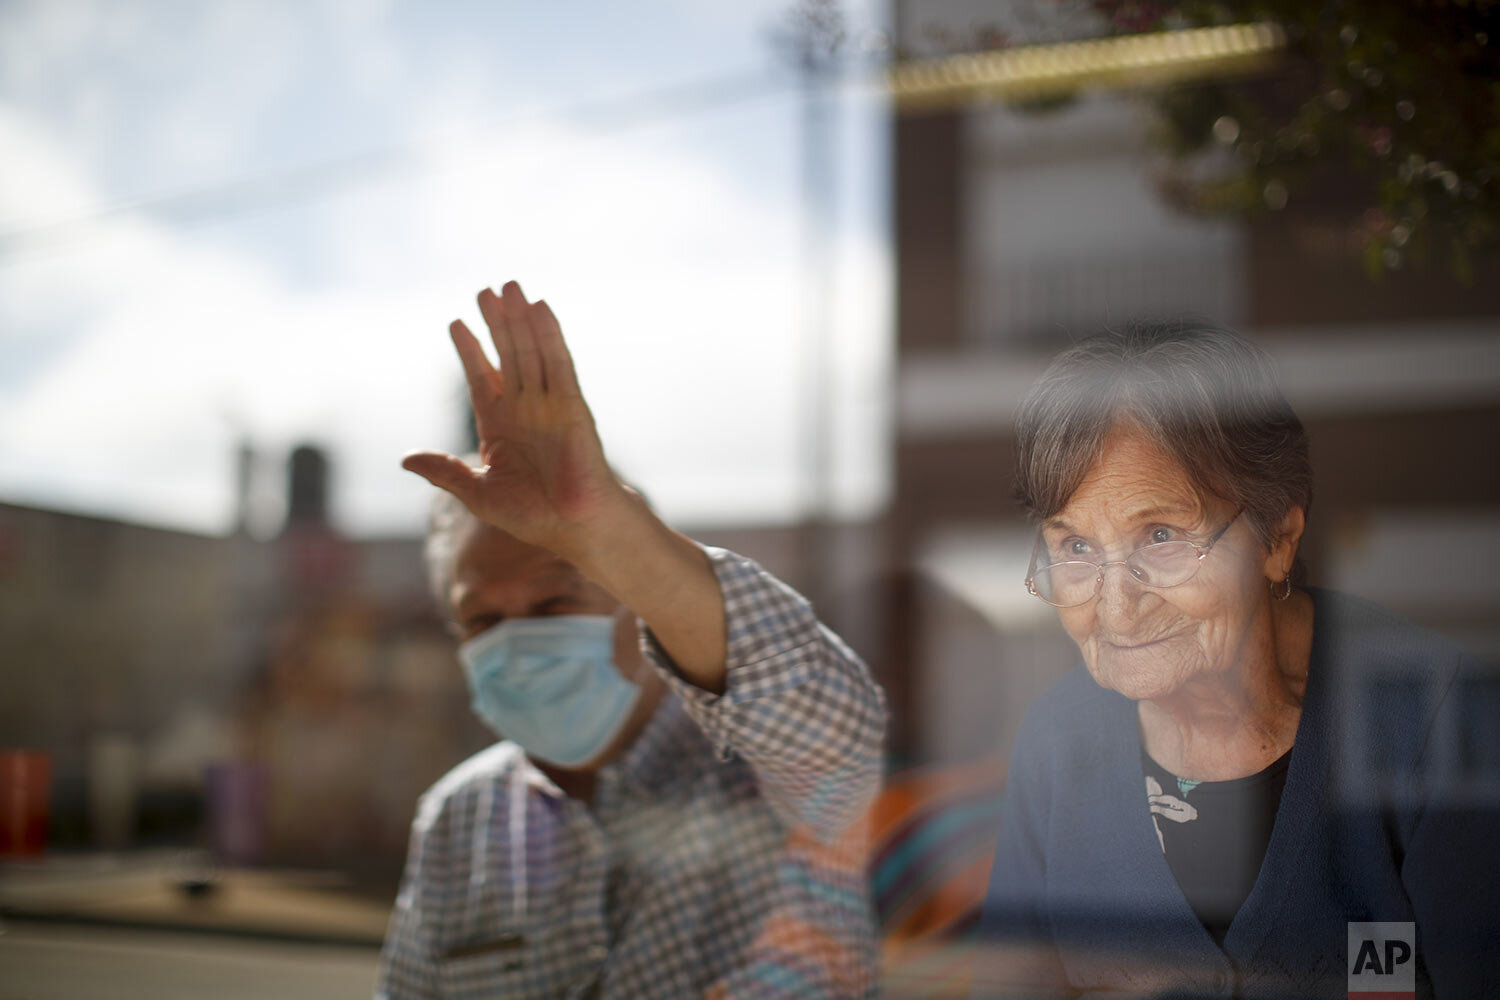  Arceli Armando watches her son wave to her from outside of the Reminiscencias residence for the elderly where she lives in Tandil, Argentina, Monday, April 5, 2021. (AP Photo/Natacha Pisarenko) 